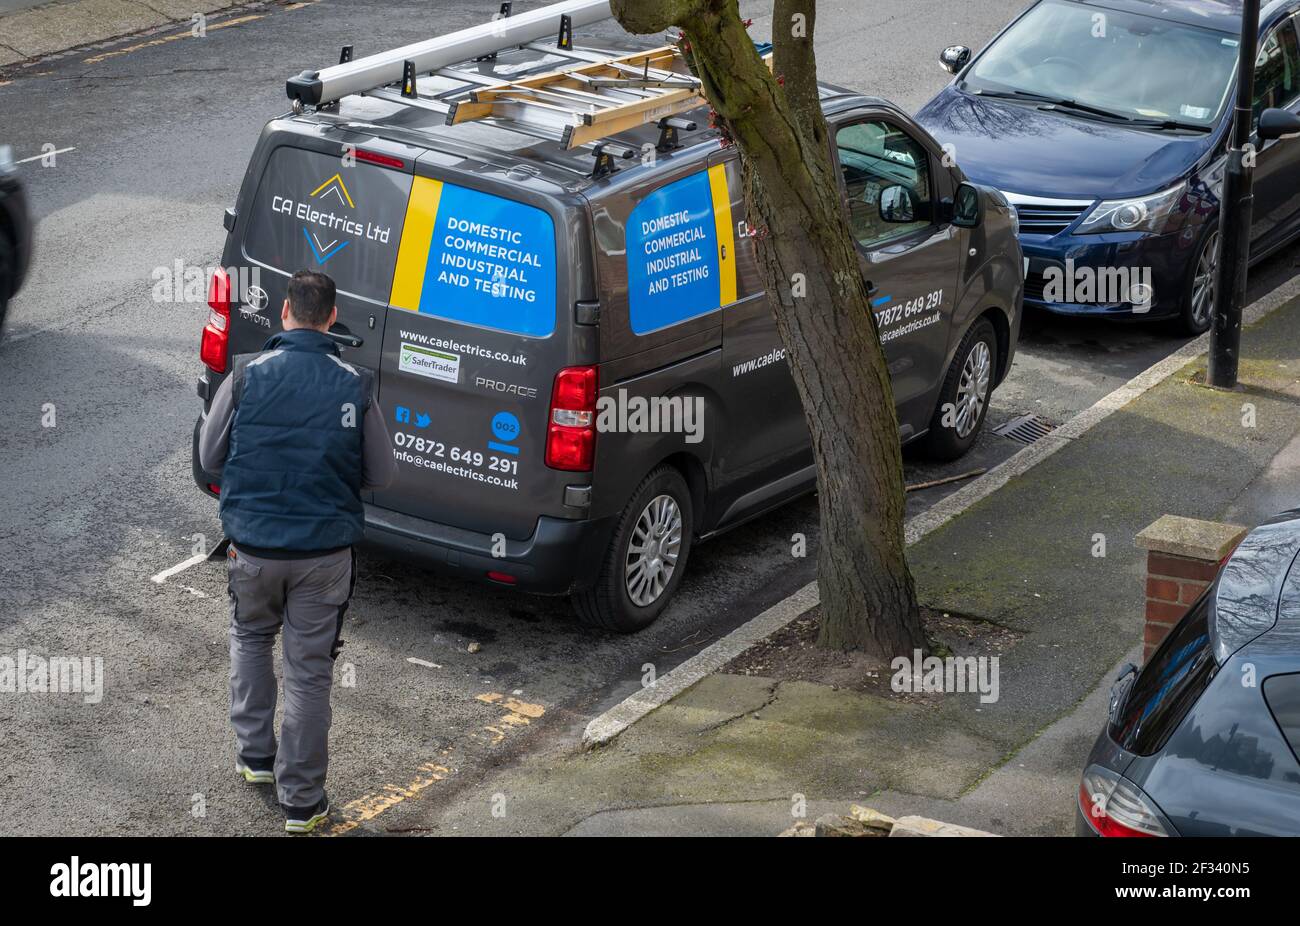 The vehicle of a electric service company and the electrician on call out to carry out electrical work. Stock Photo